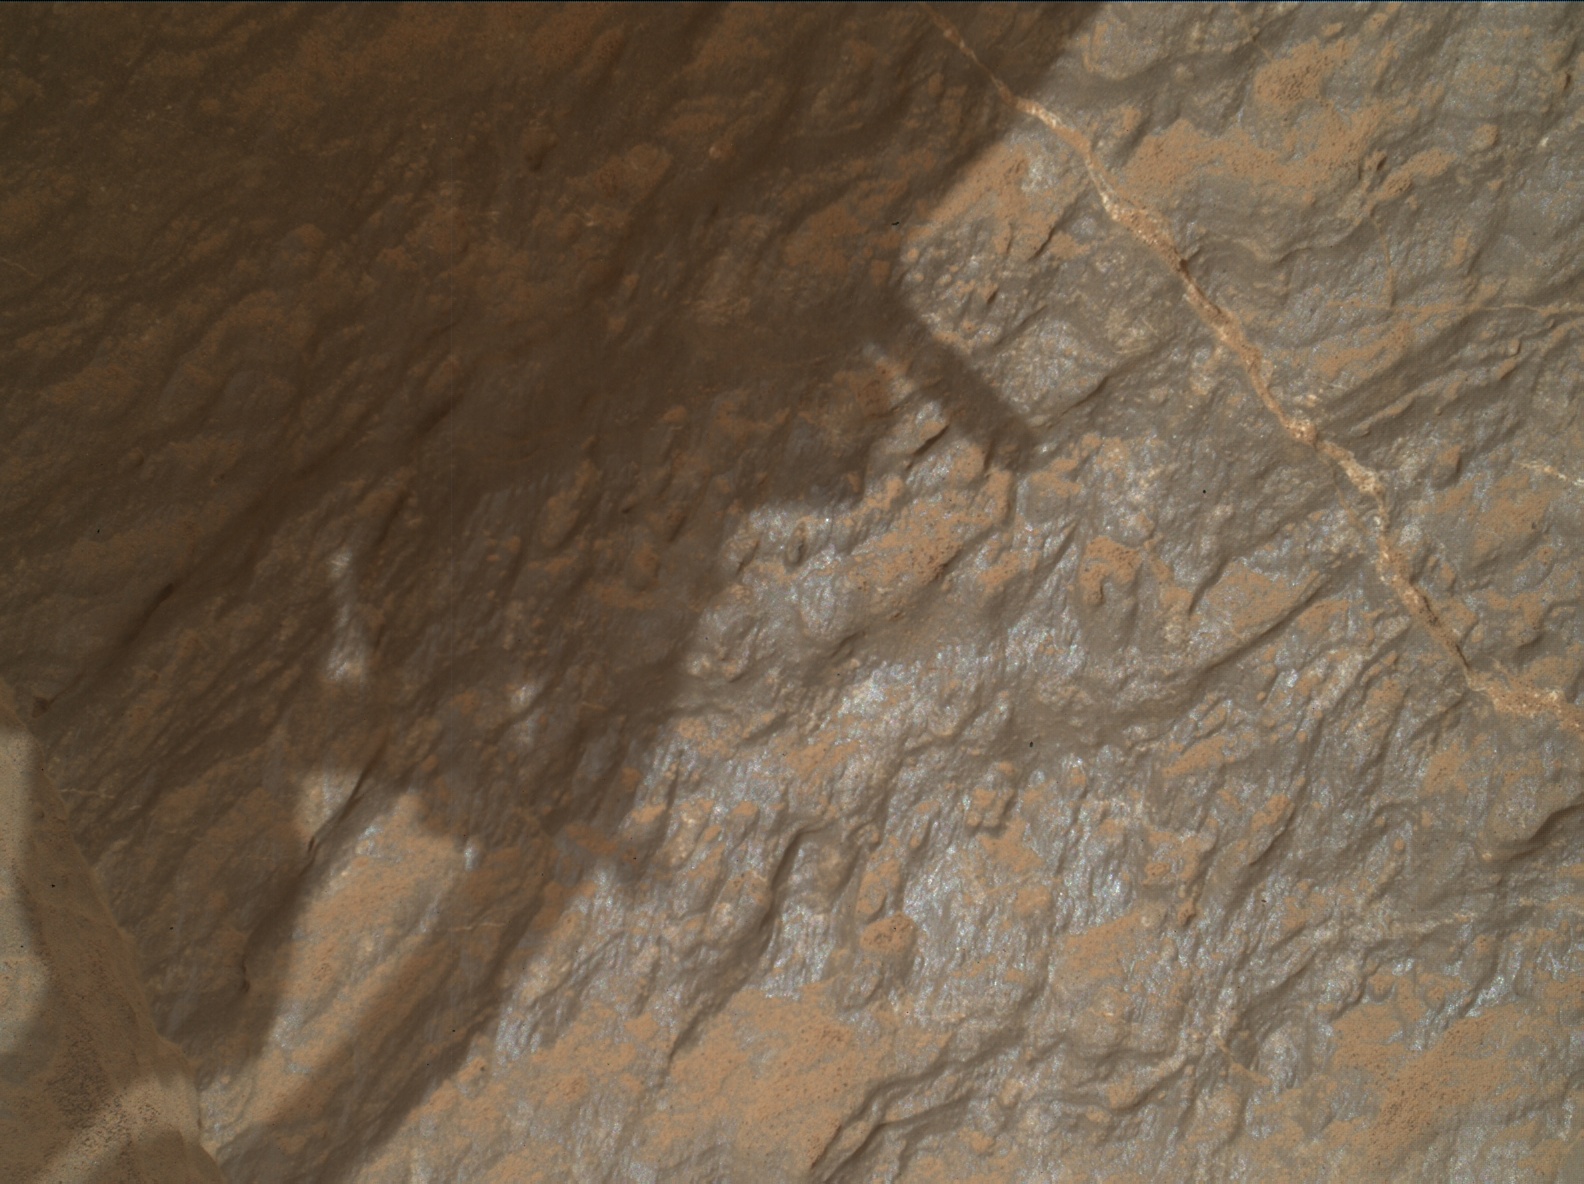 Nasa's Mars rover Curiosity acquired this image using its Mars Hand Lens Imager (MAHLI) on Sol 3646